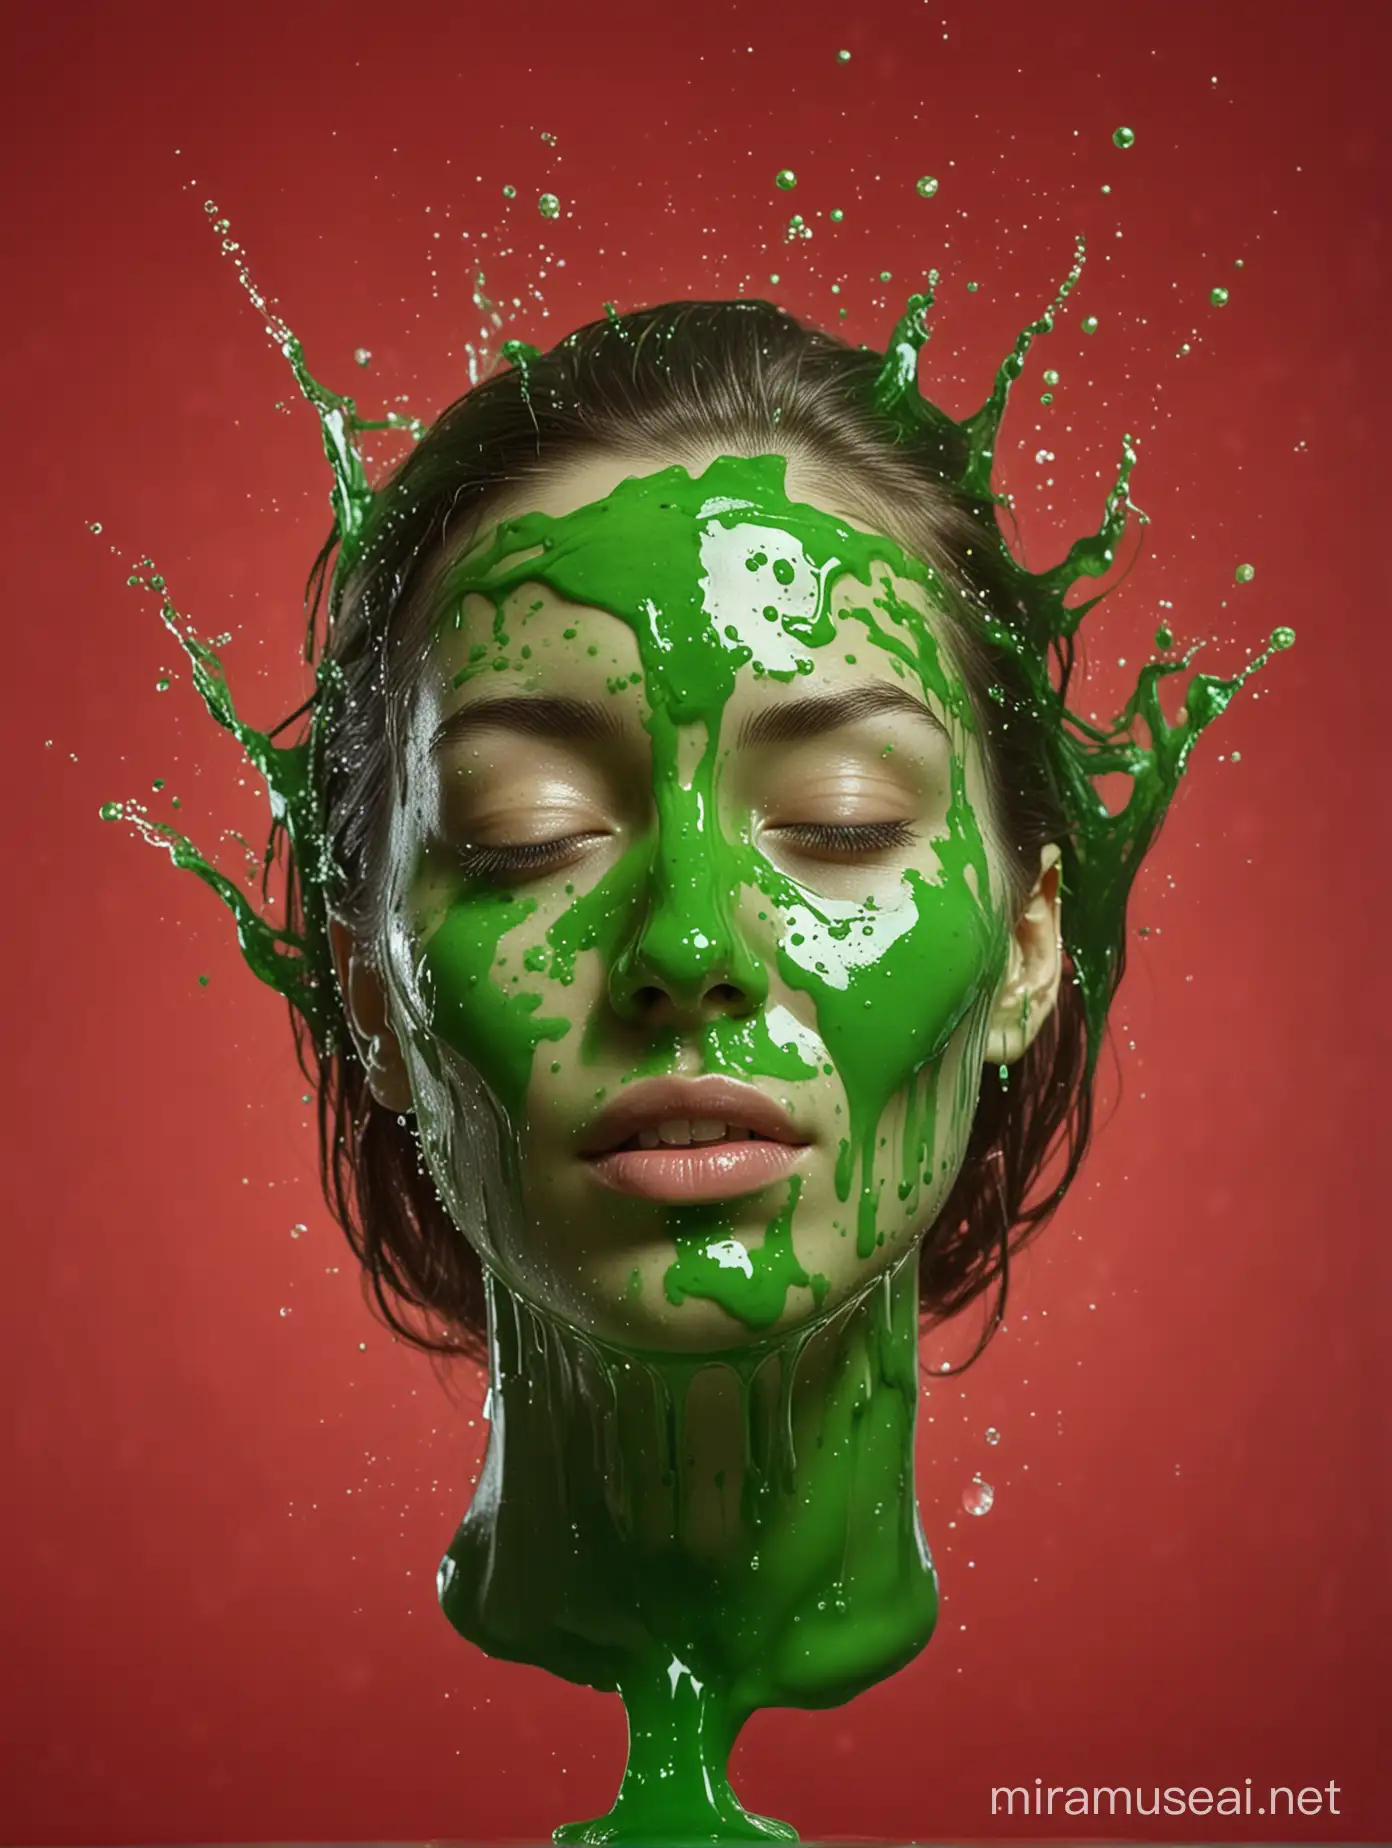 Floating Womans Head in Vivid Green Liquid against Red Background